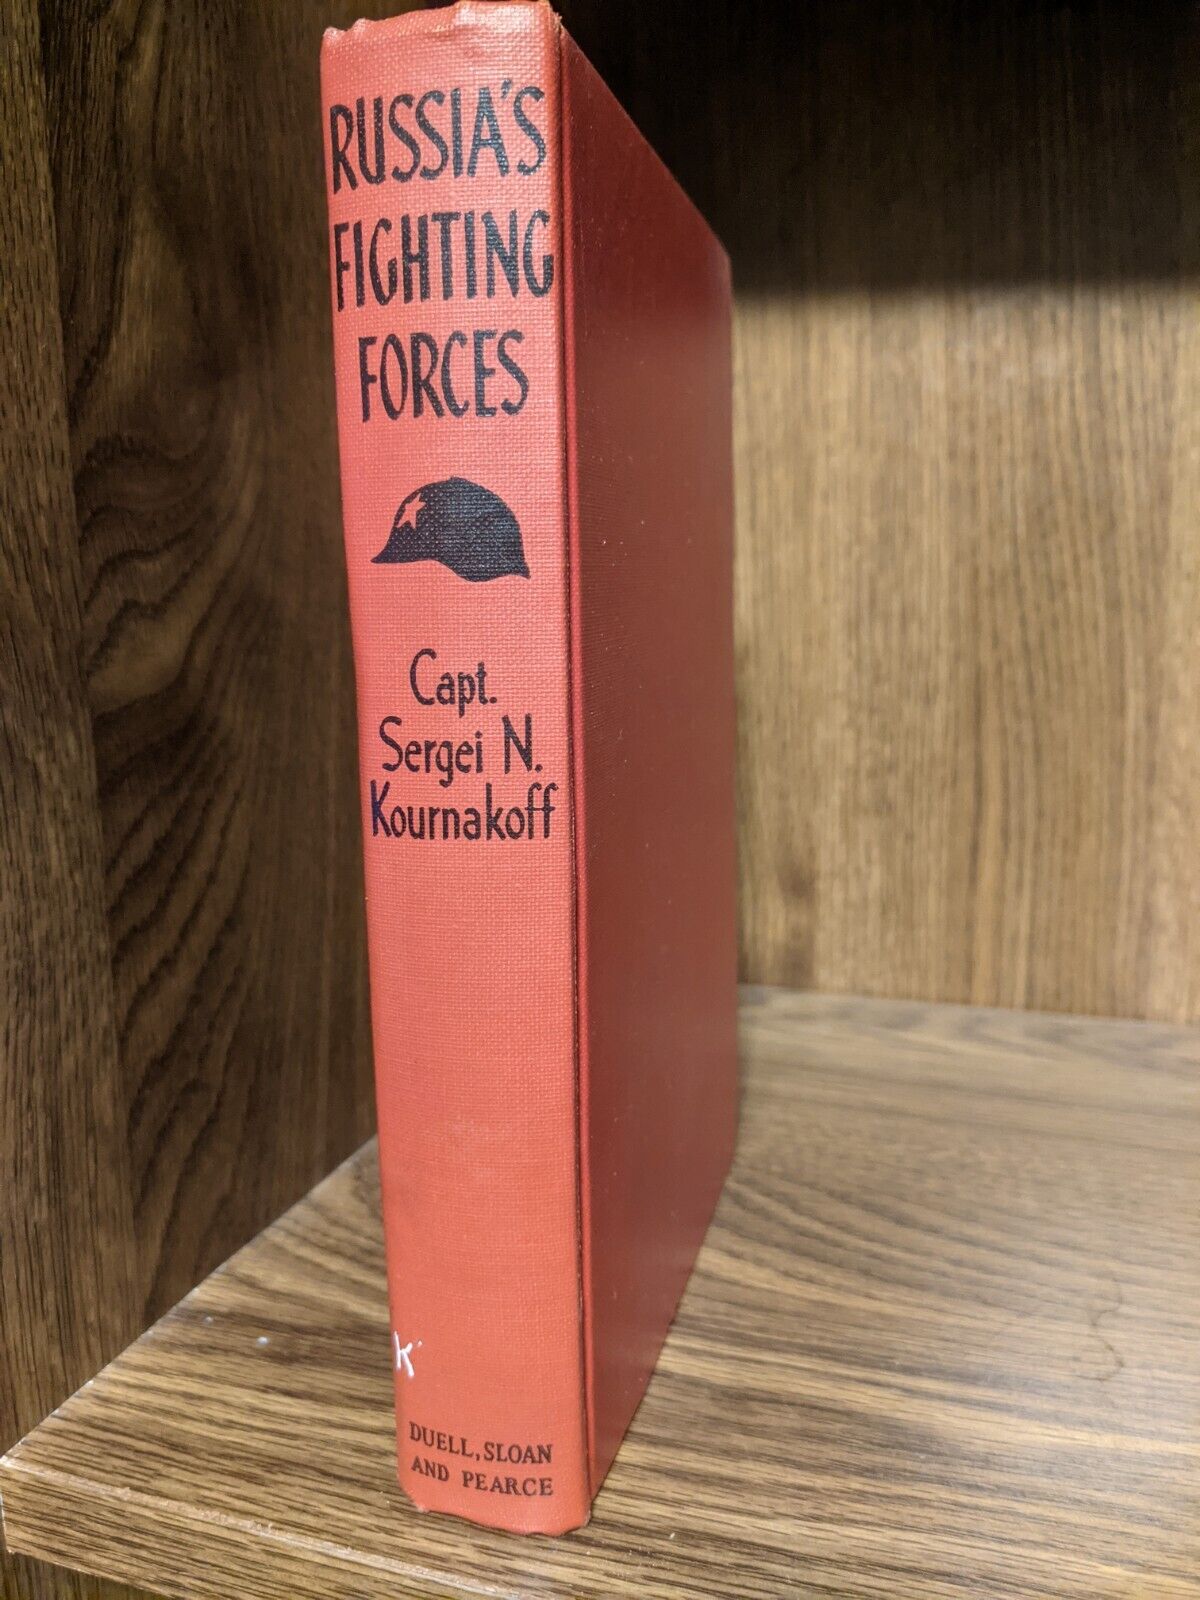 Vintage 1942 Russia\'s Fighting Forces by Sergei N. Kournakoff Hardcover